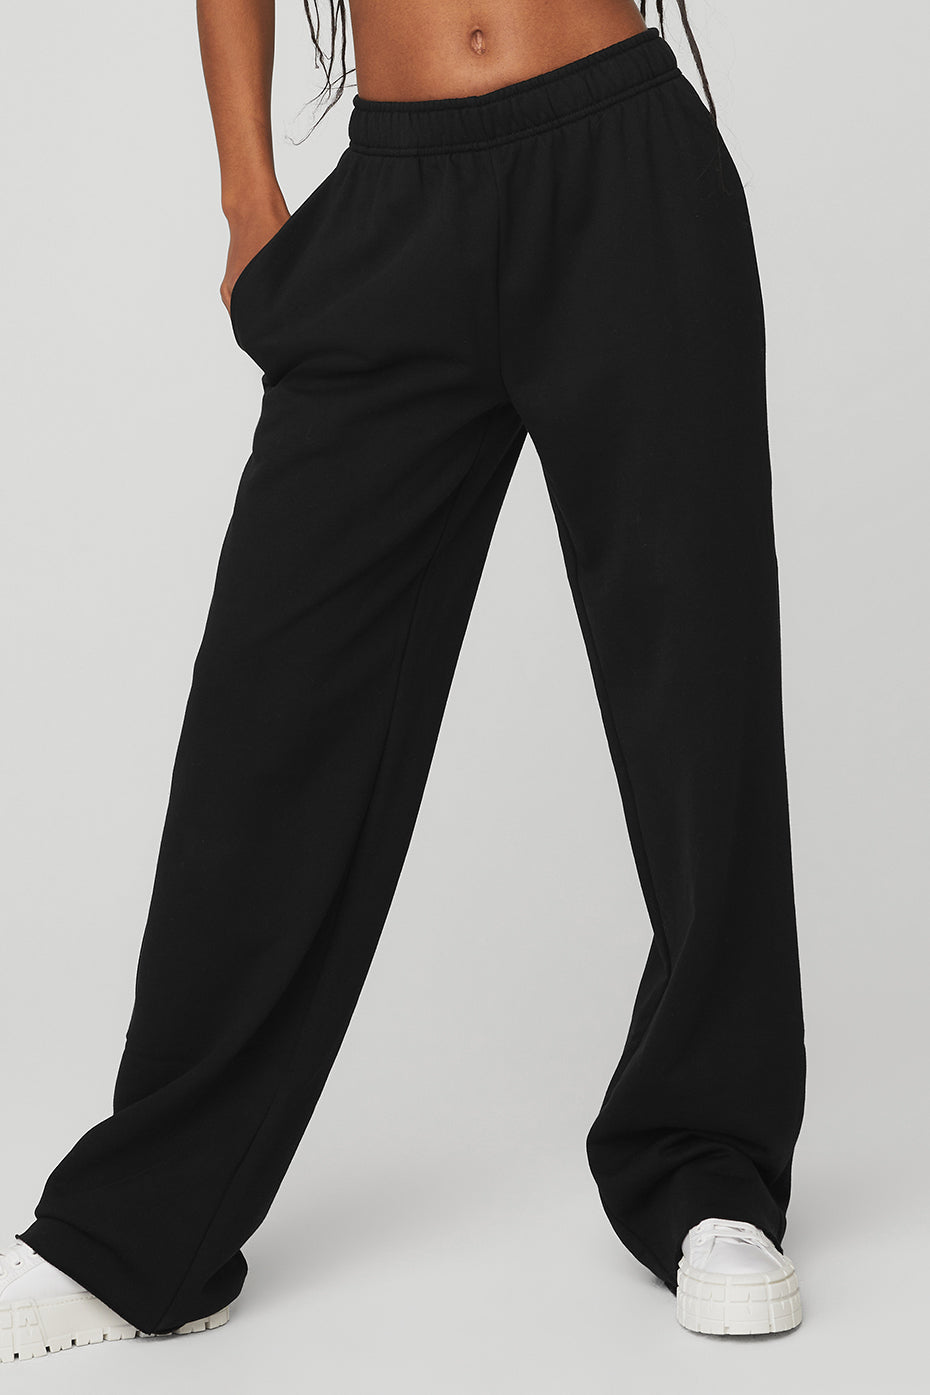 Puddle Sweatpant in Black by Alo Yoga